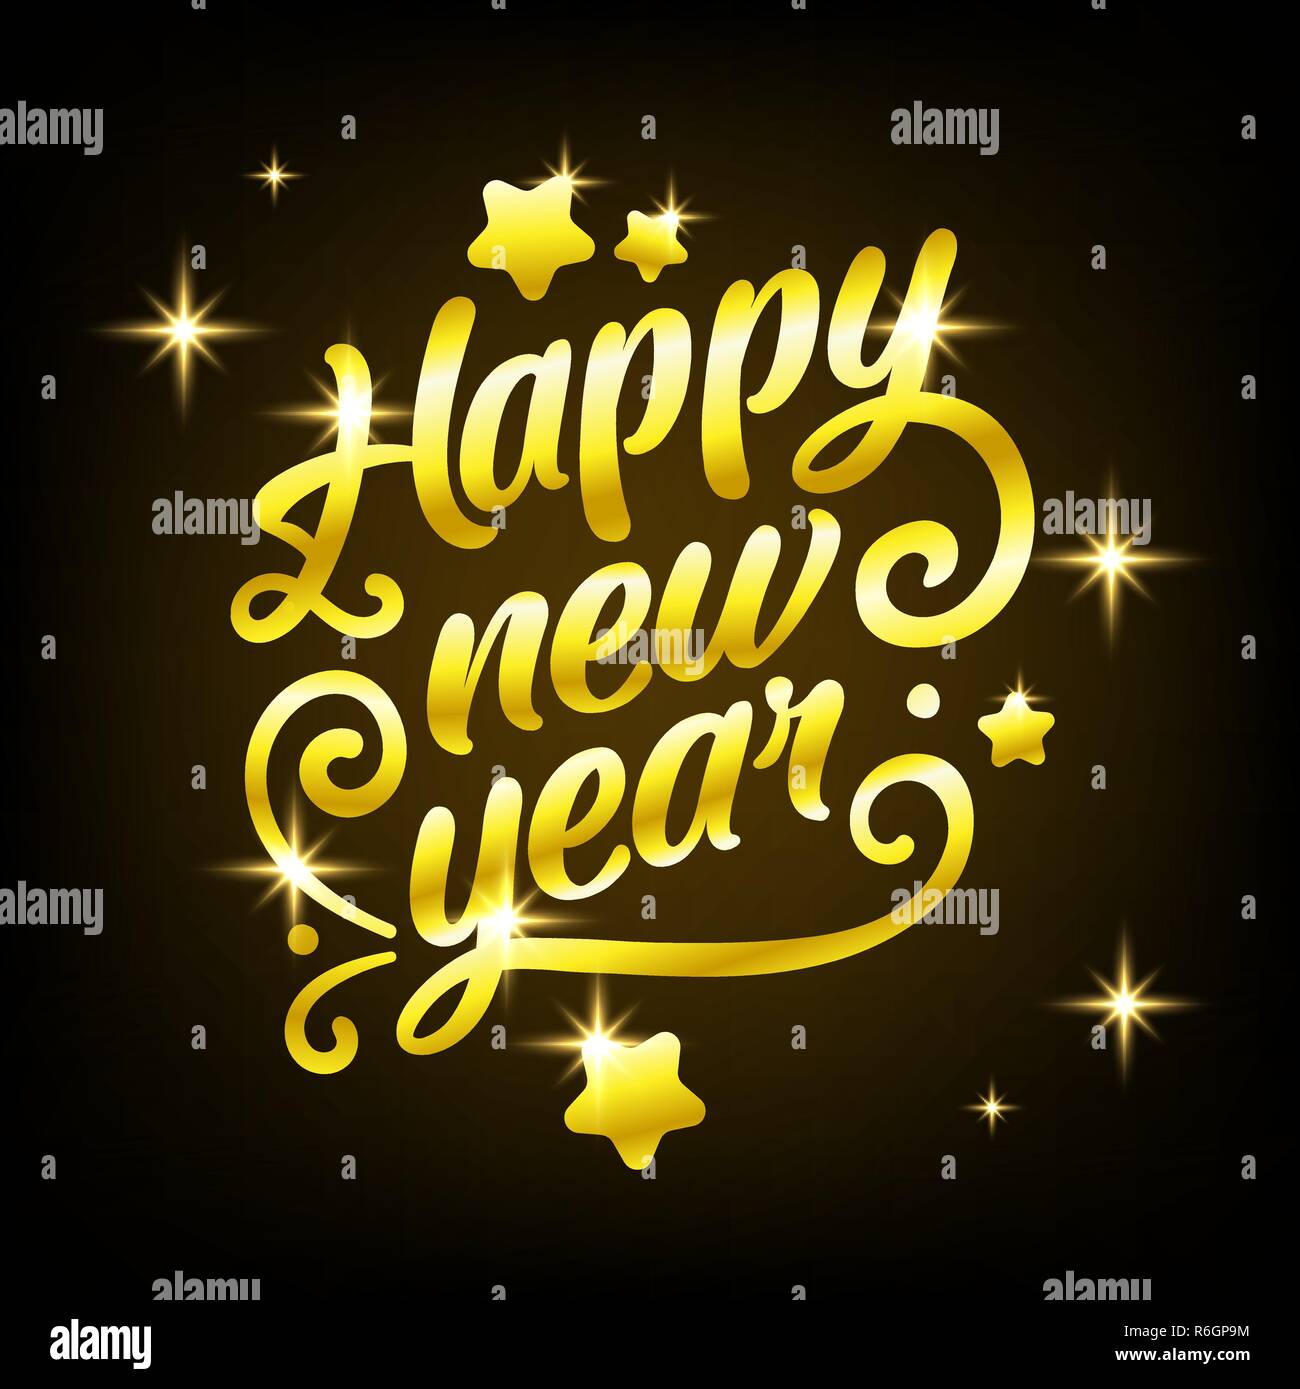 Golden Happy New Year sign 2019 Holiday Vector Illustration. Shiny Gold Lettering Composition With Sparkles Stock Vector